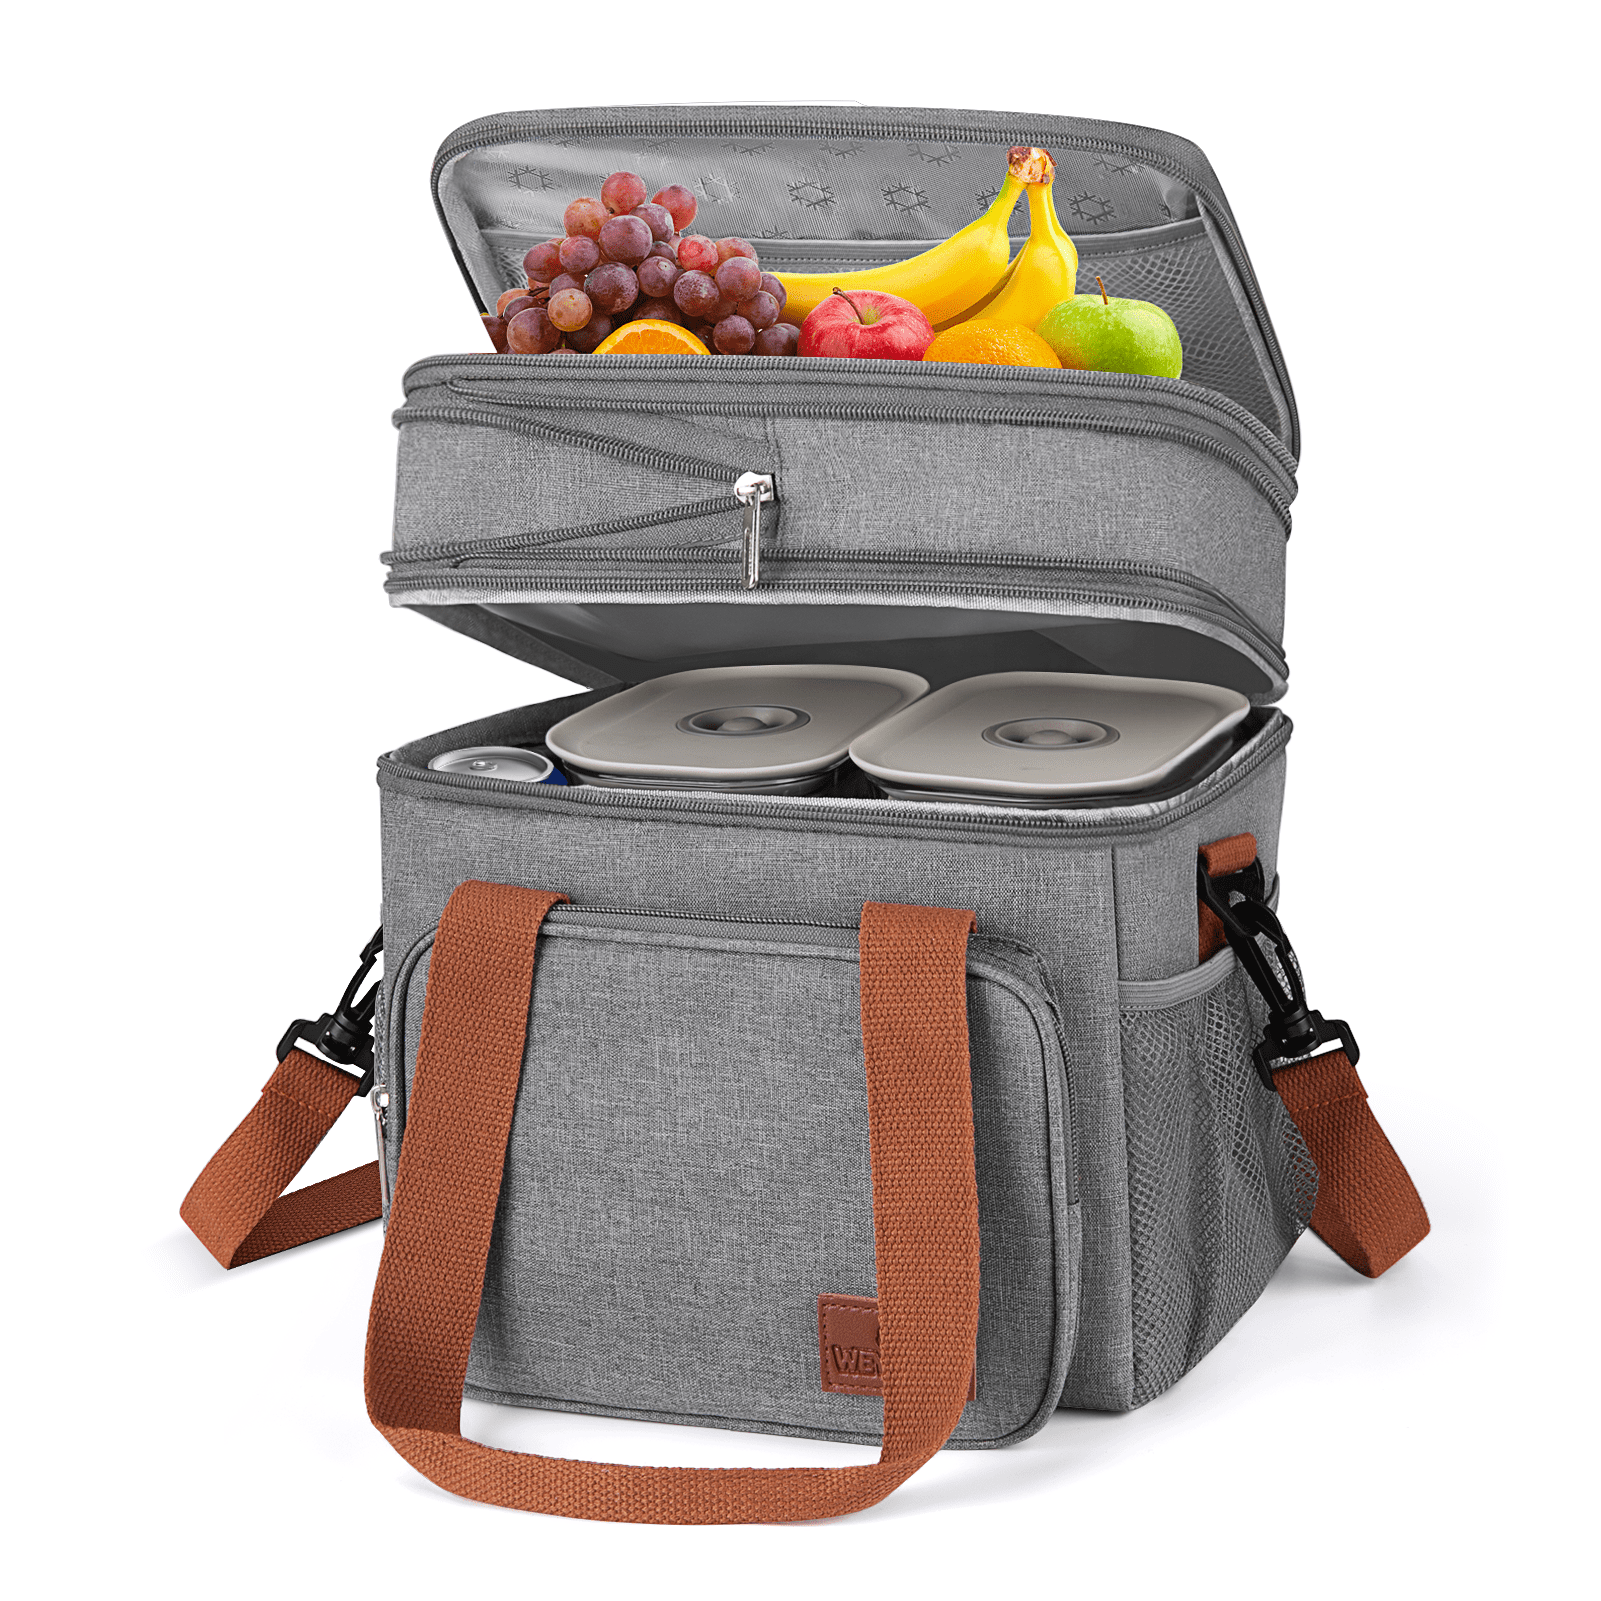 Lifewit Reusable Insulated Lunch Bag for Men, Lunch Box Women, Portable  Cooler Freezable Soft Lunchb…See more Lifewit Reusable Insulated Lunch Bag  for